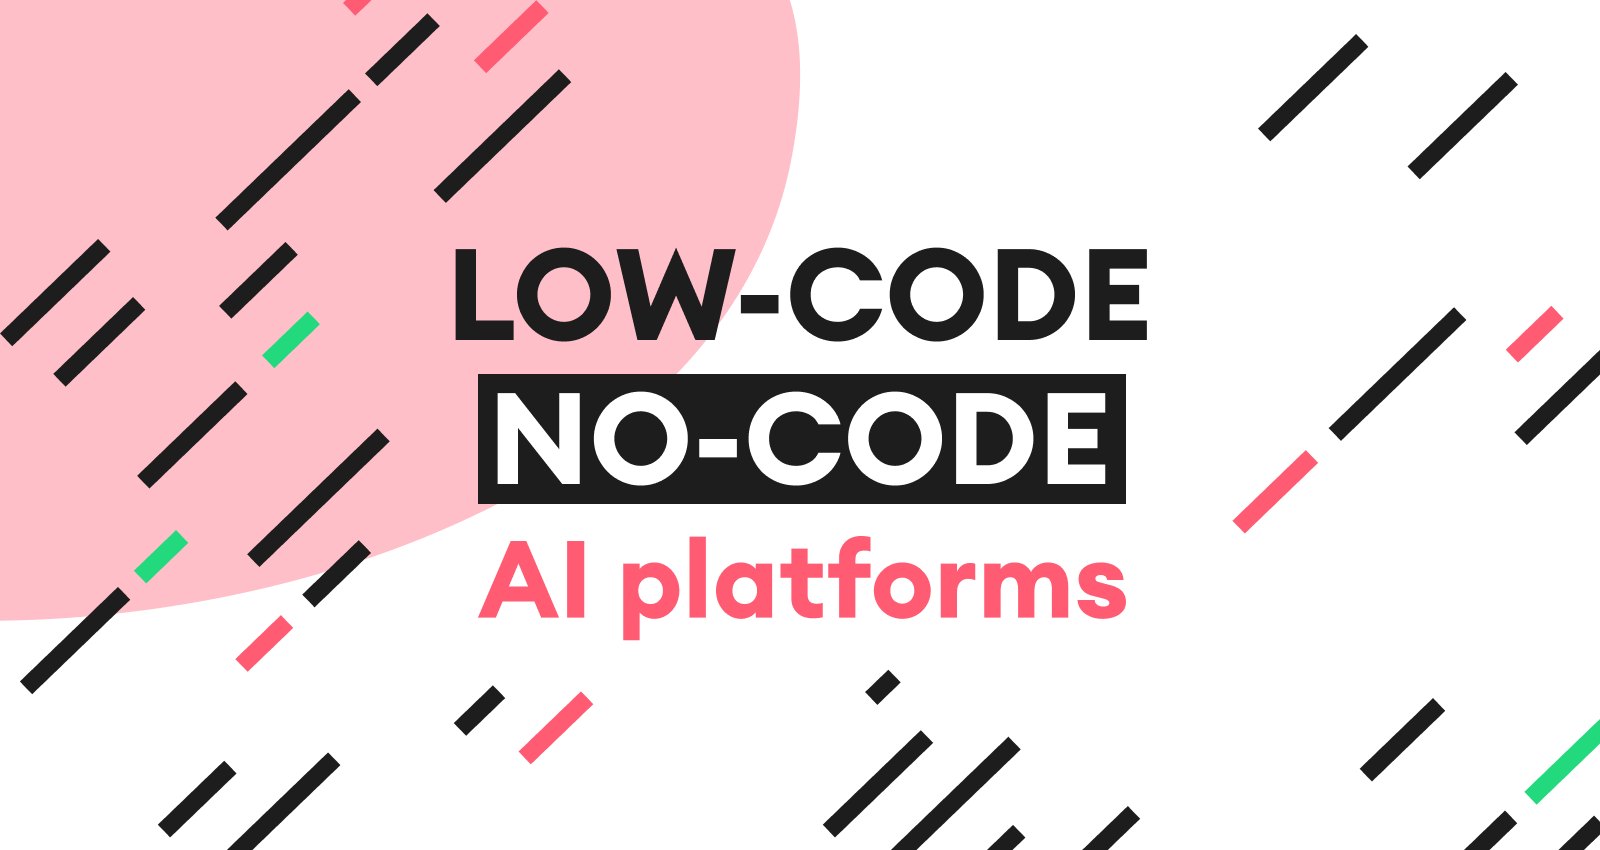 Low-code or No-code AI